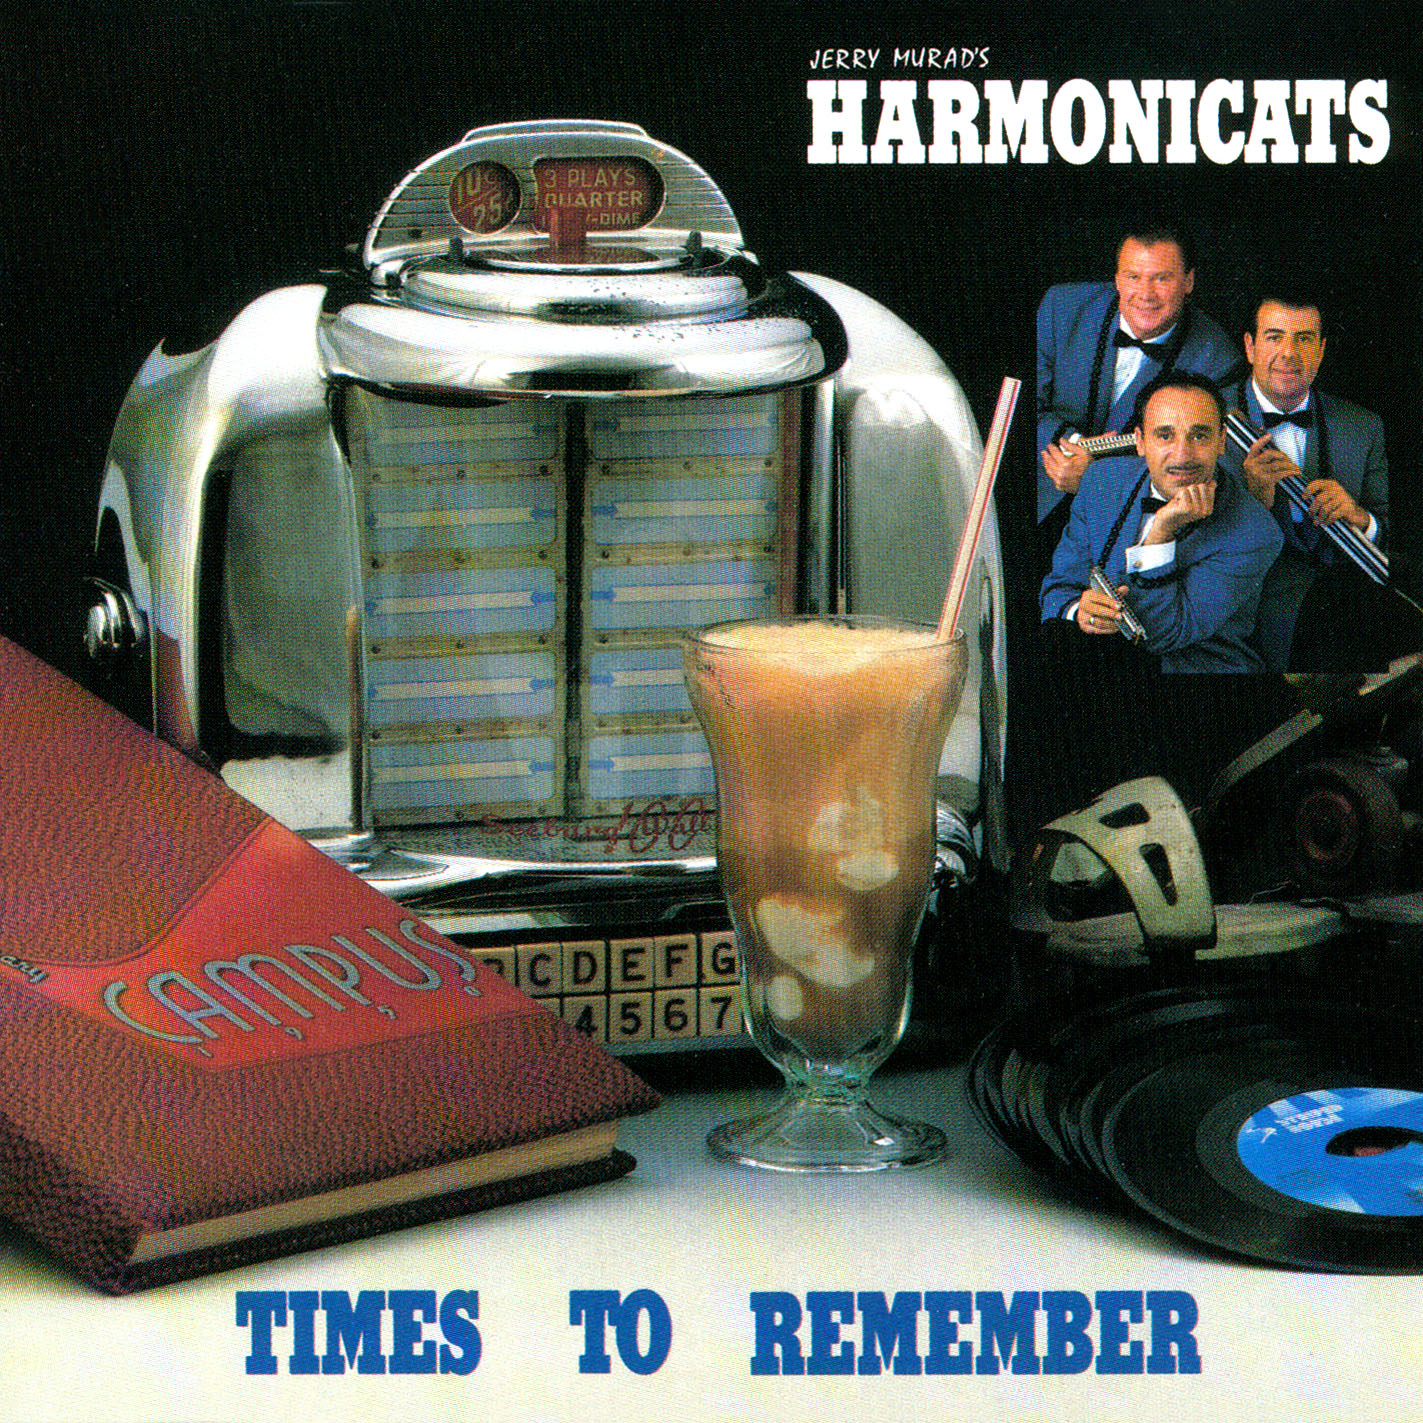 The Harmonicats - Times to Remember